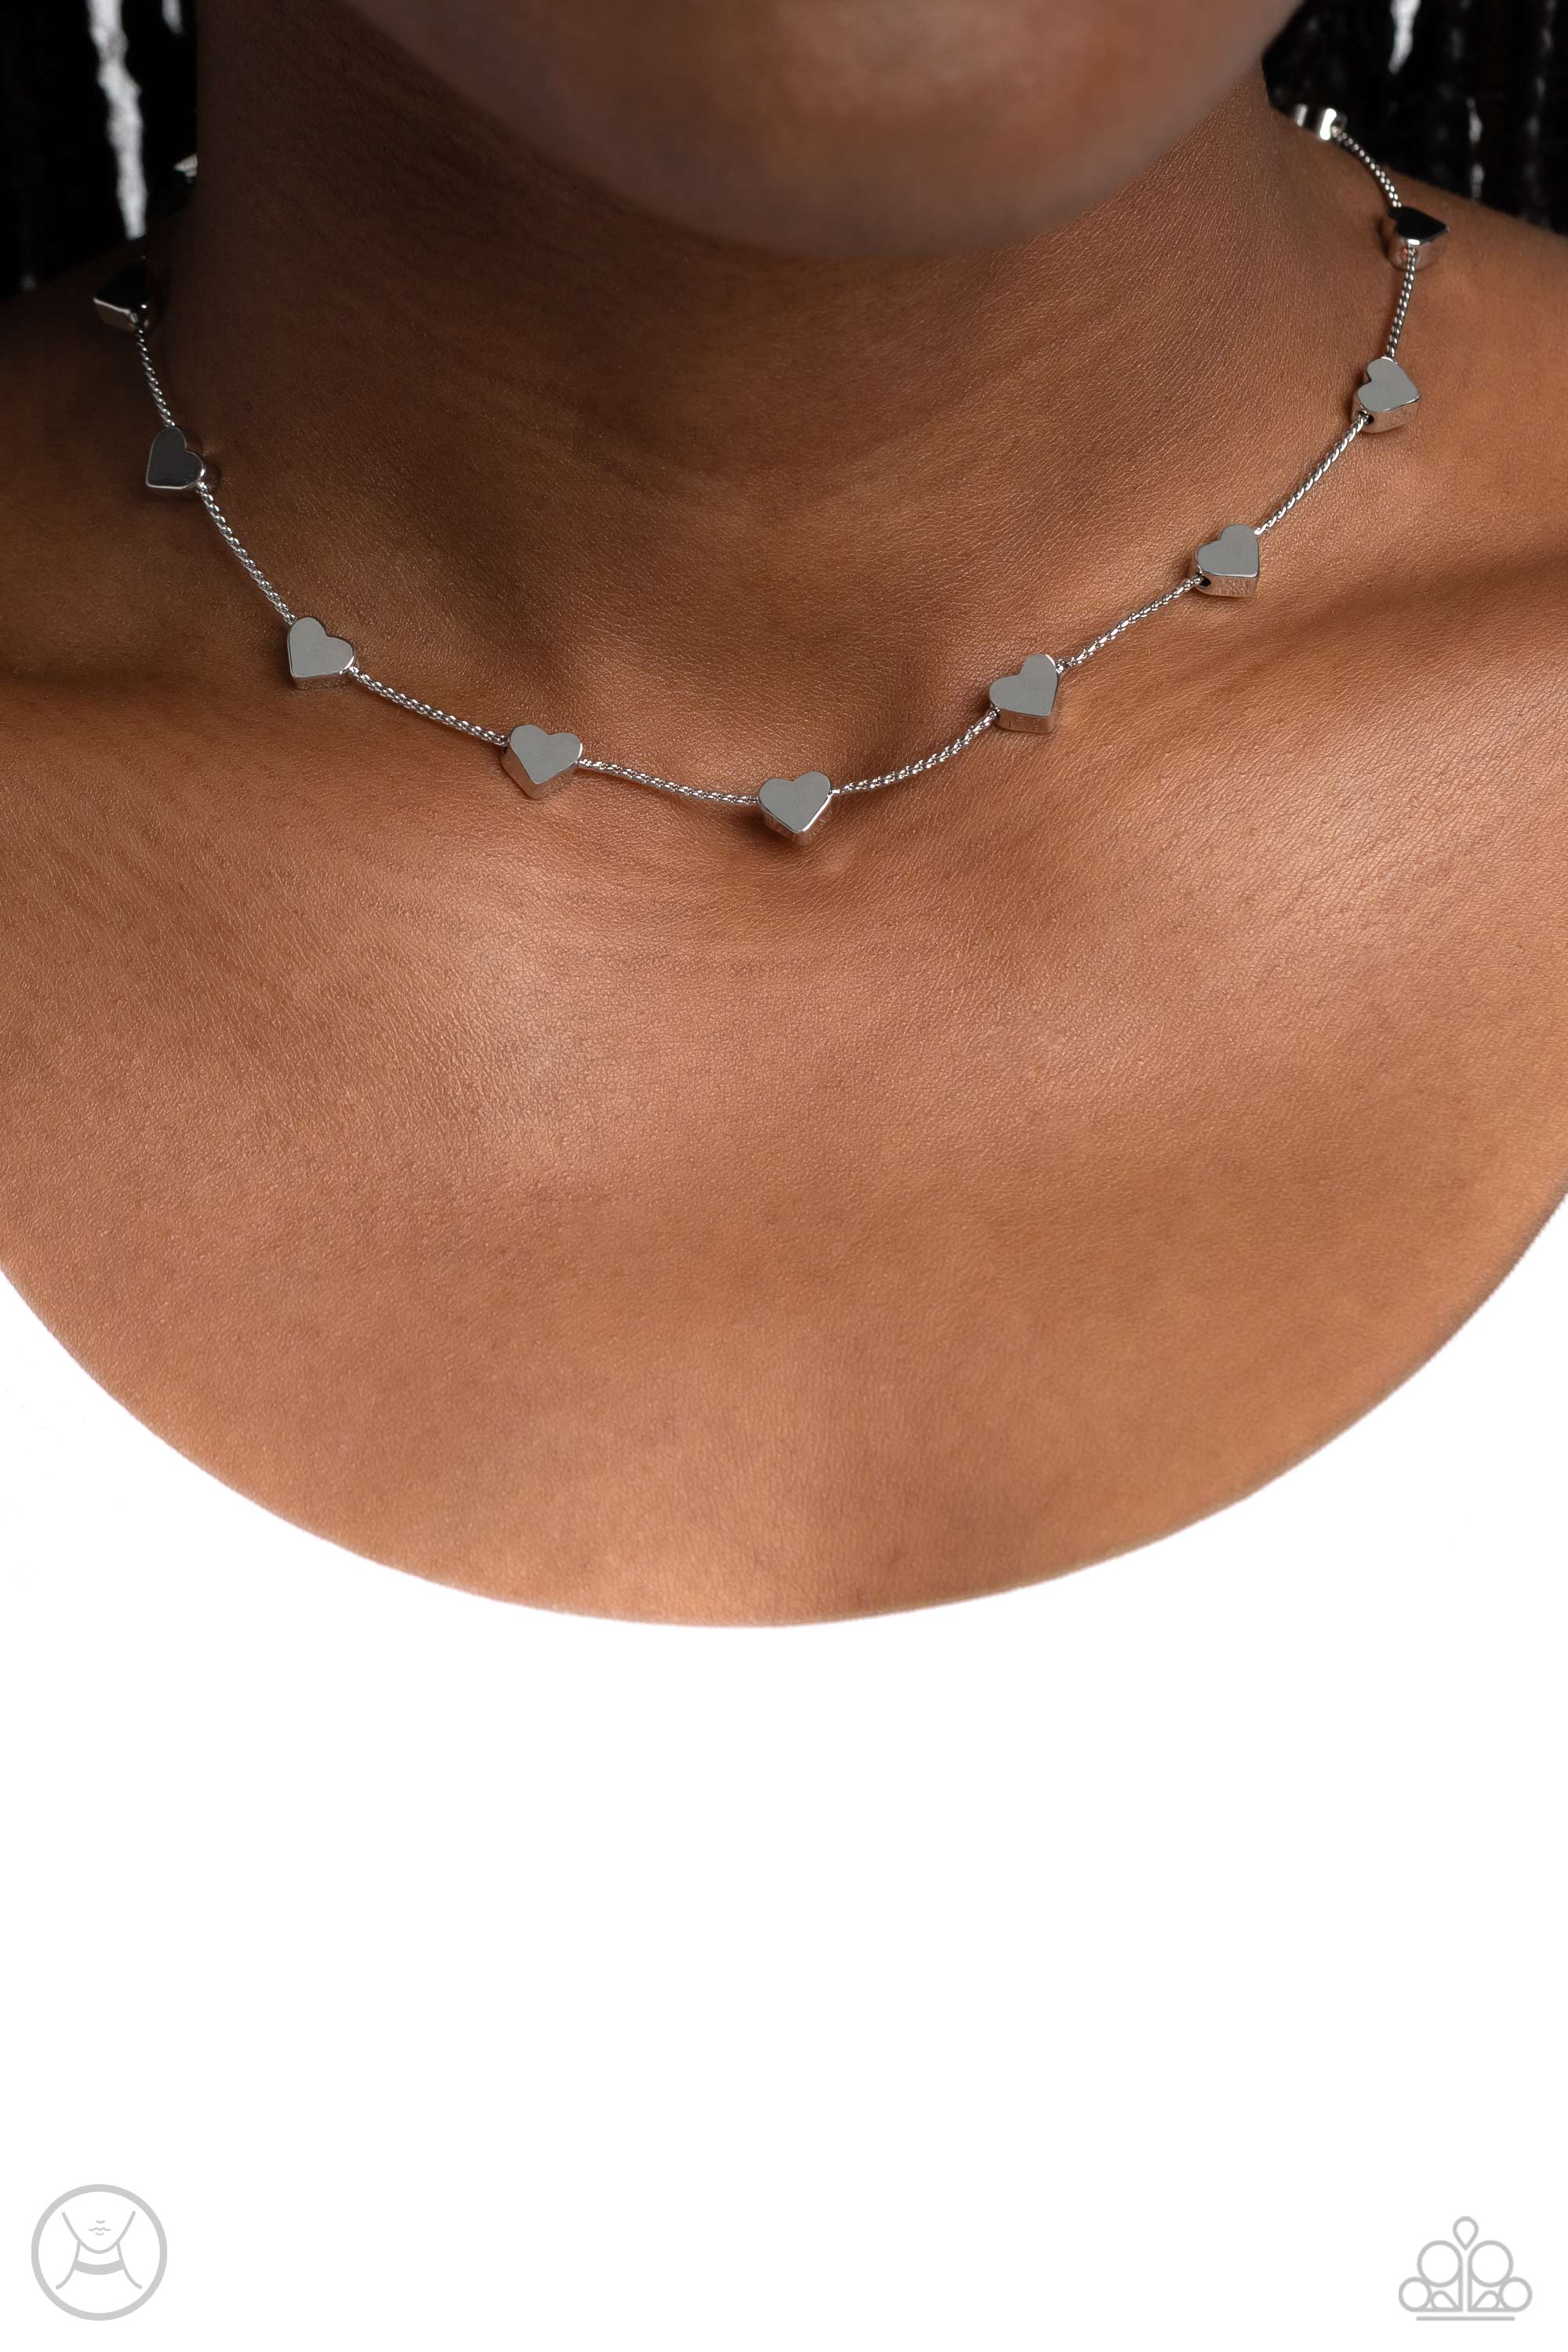 Public Display of Affection Silver Heart Choker Necklace - Paparazzi Accessories- lightbox - CarasShop.com - $5 Jewelry by Cara Jewels